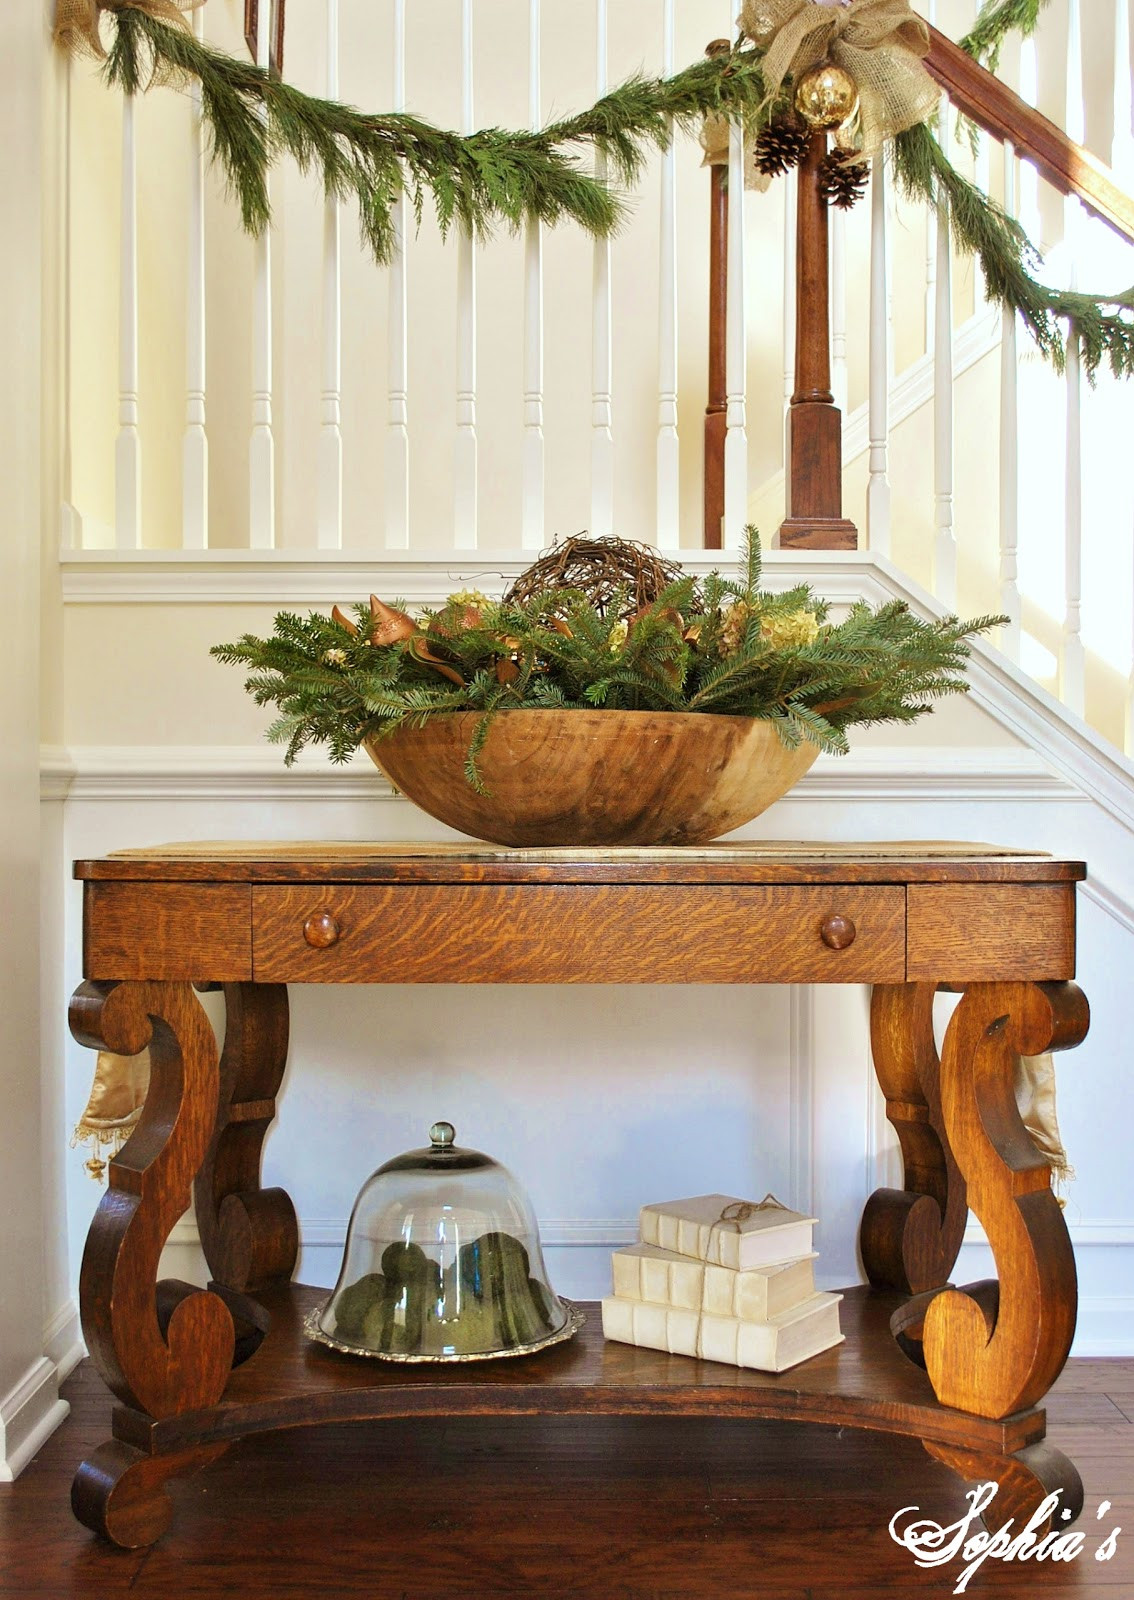 Christmas Entryway Ideas
 Sophia s Christmas Stairs and Entryway